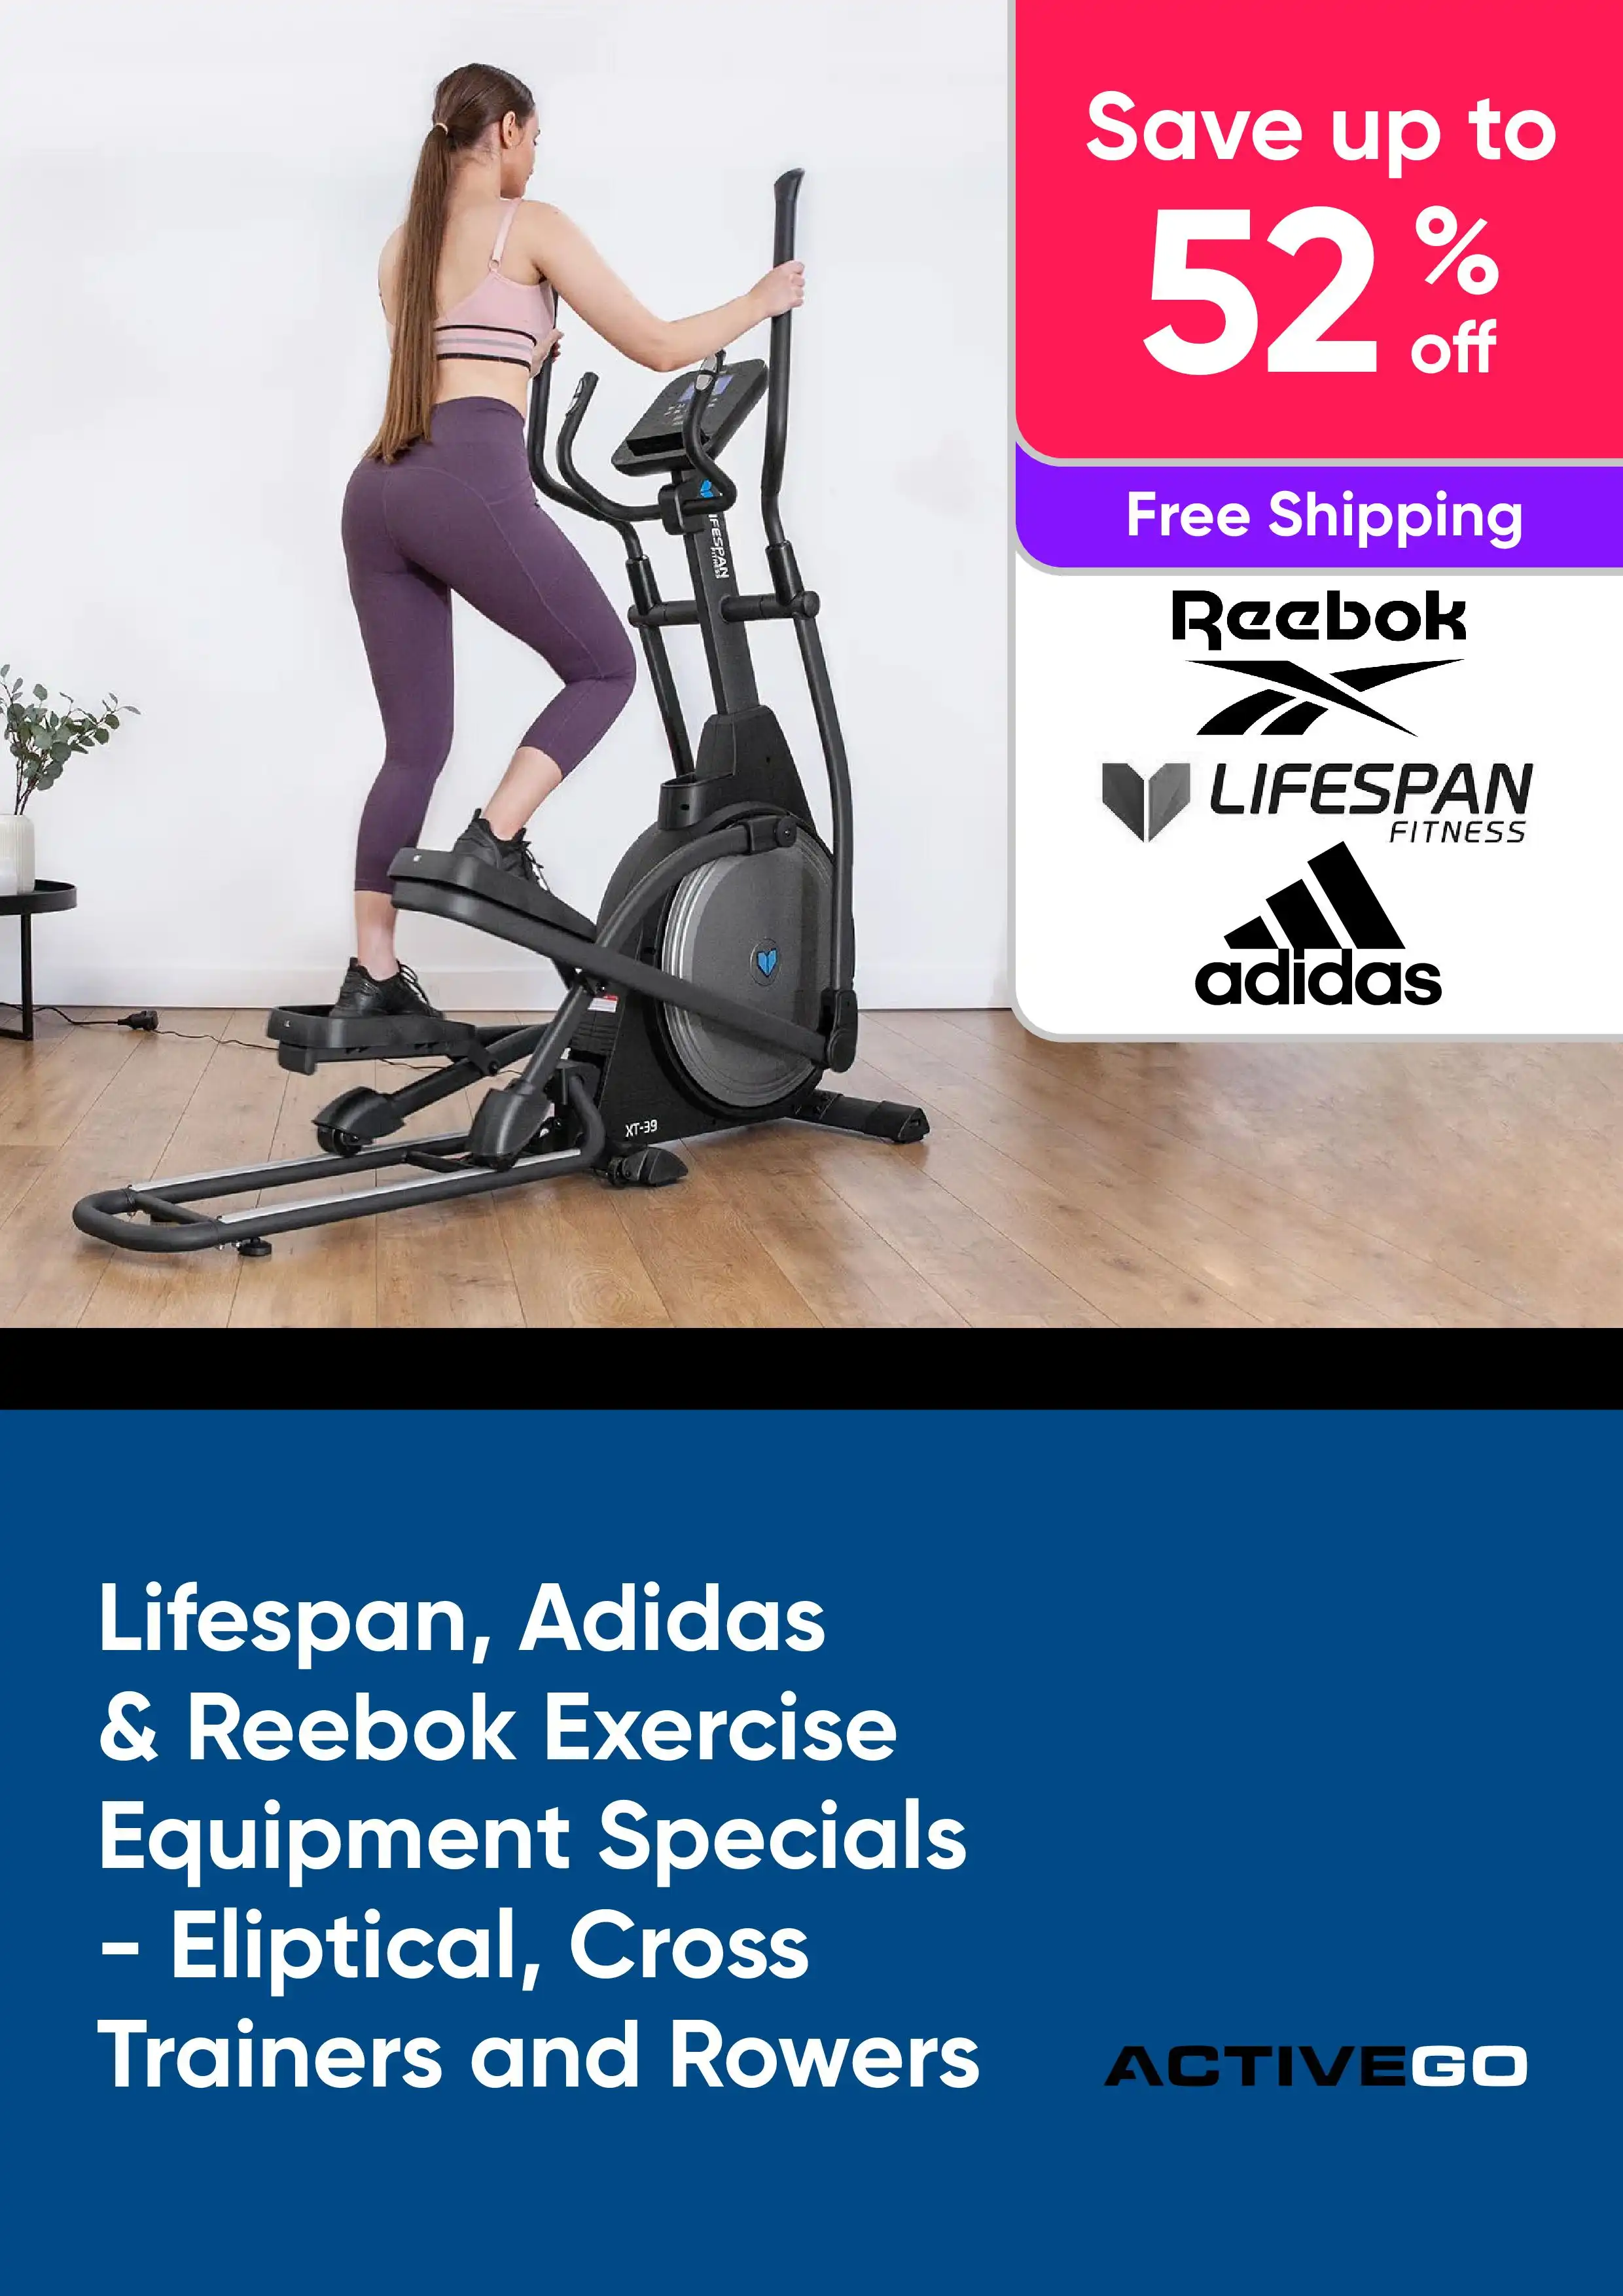 Lifespan, Adidas & Reebok Exercise Equipment Specials - Eliptical, Cross Trainers and Rowers - Save up to 52% off